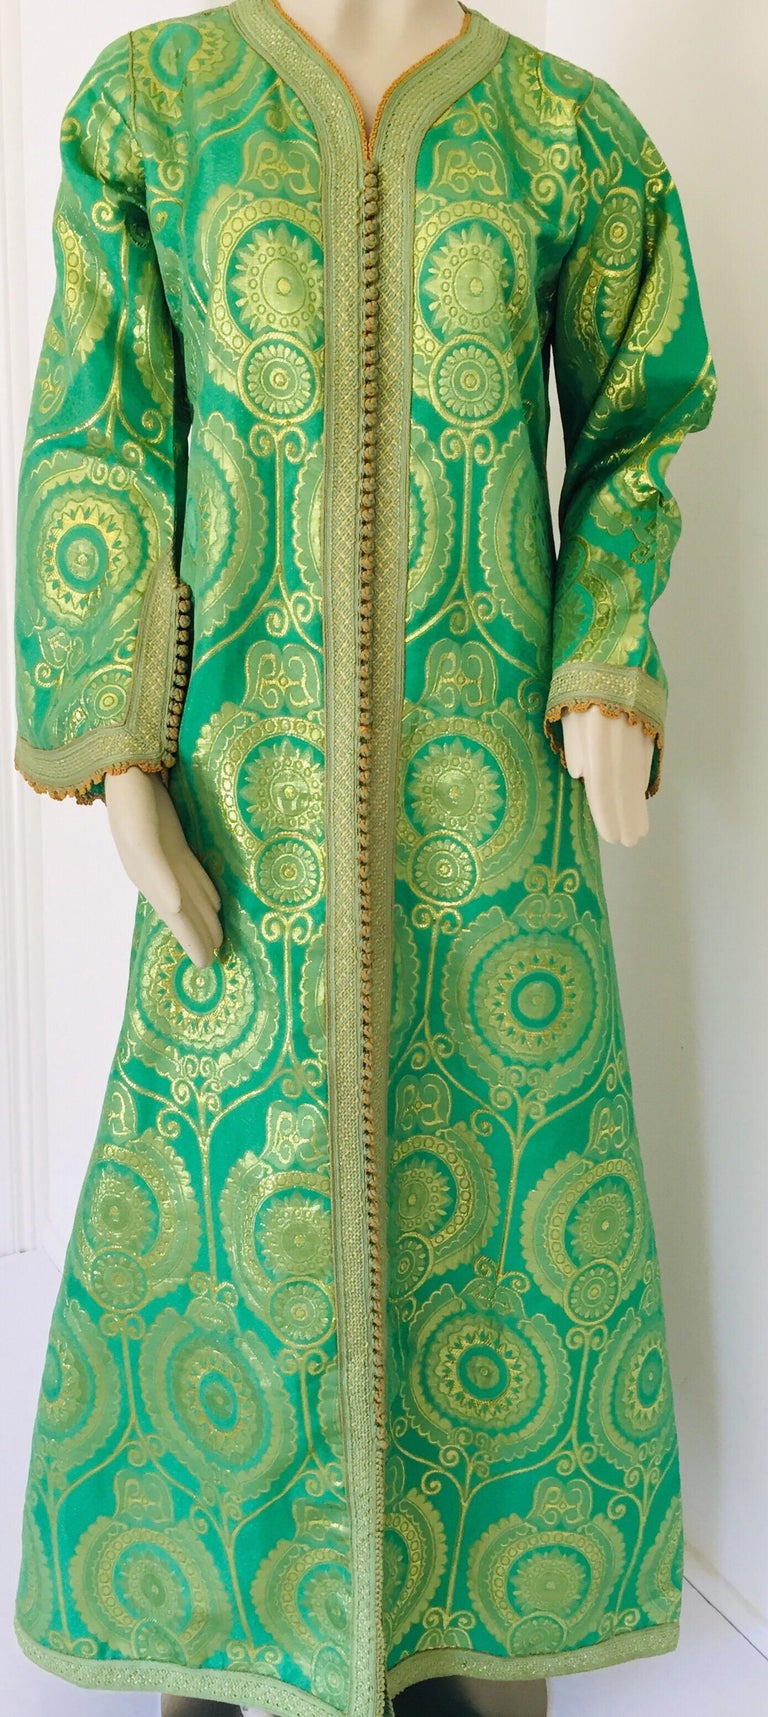 Elegant Moroccan Caftan Lime Green and Gold Metallic Floral Brocade For Sale 11